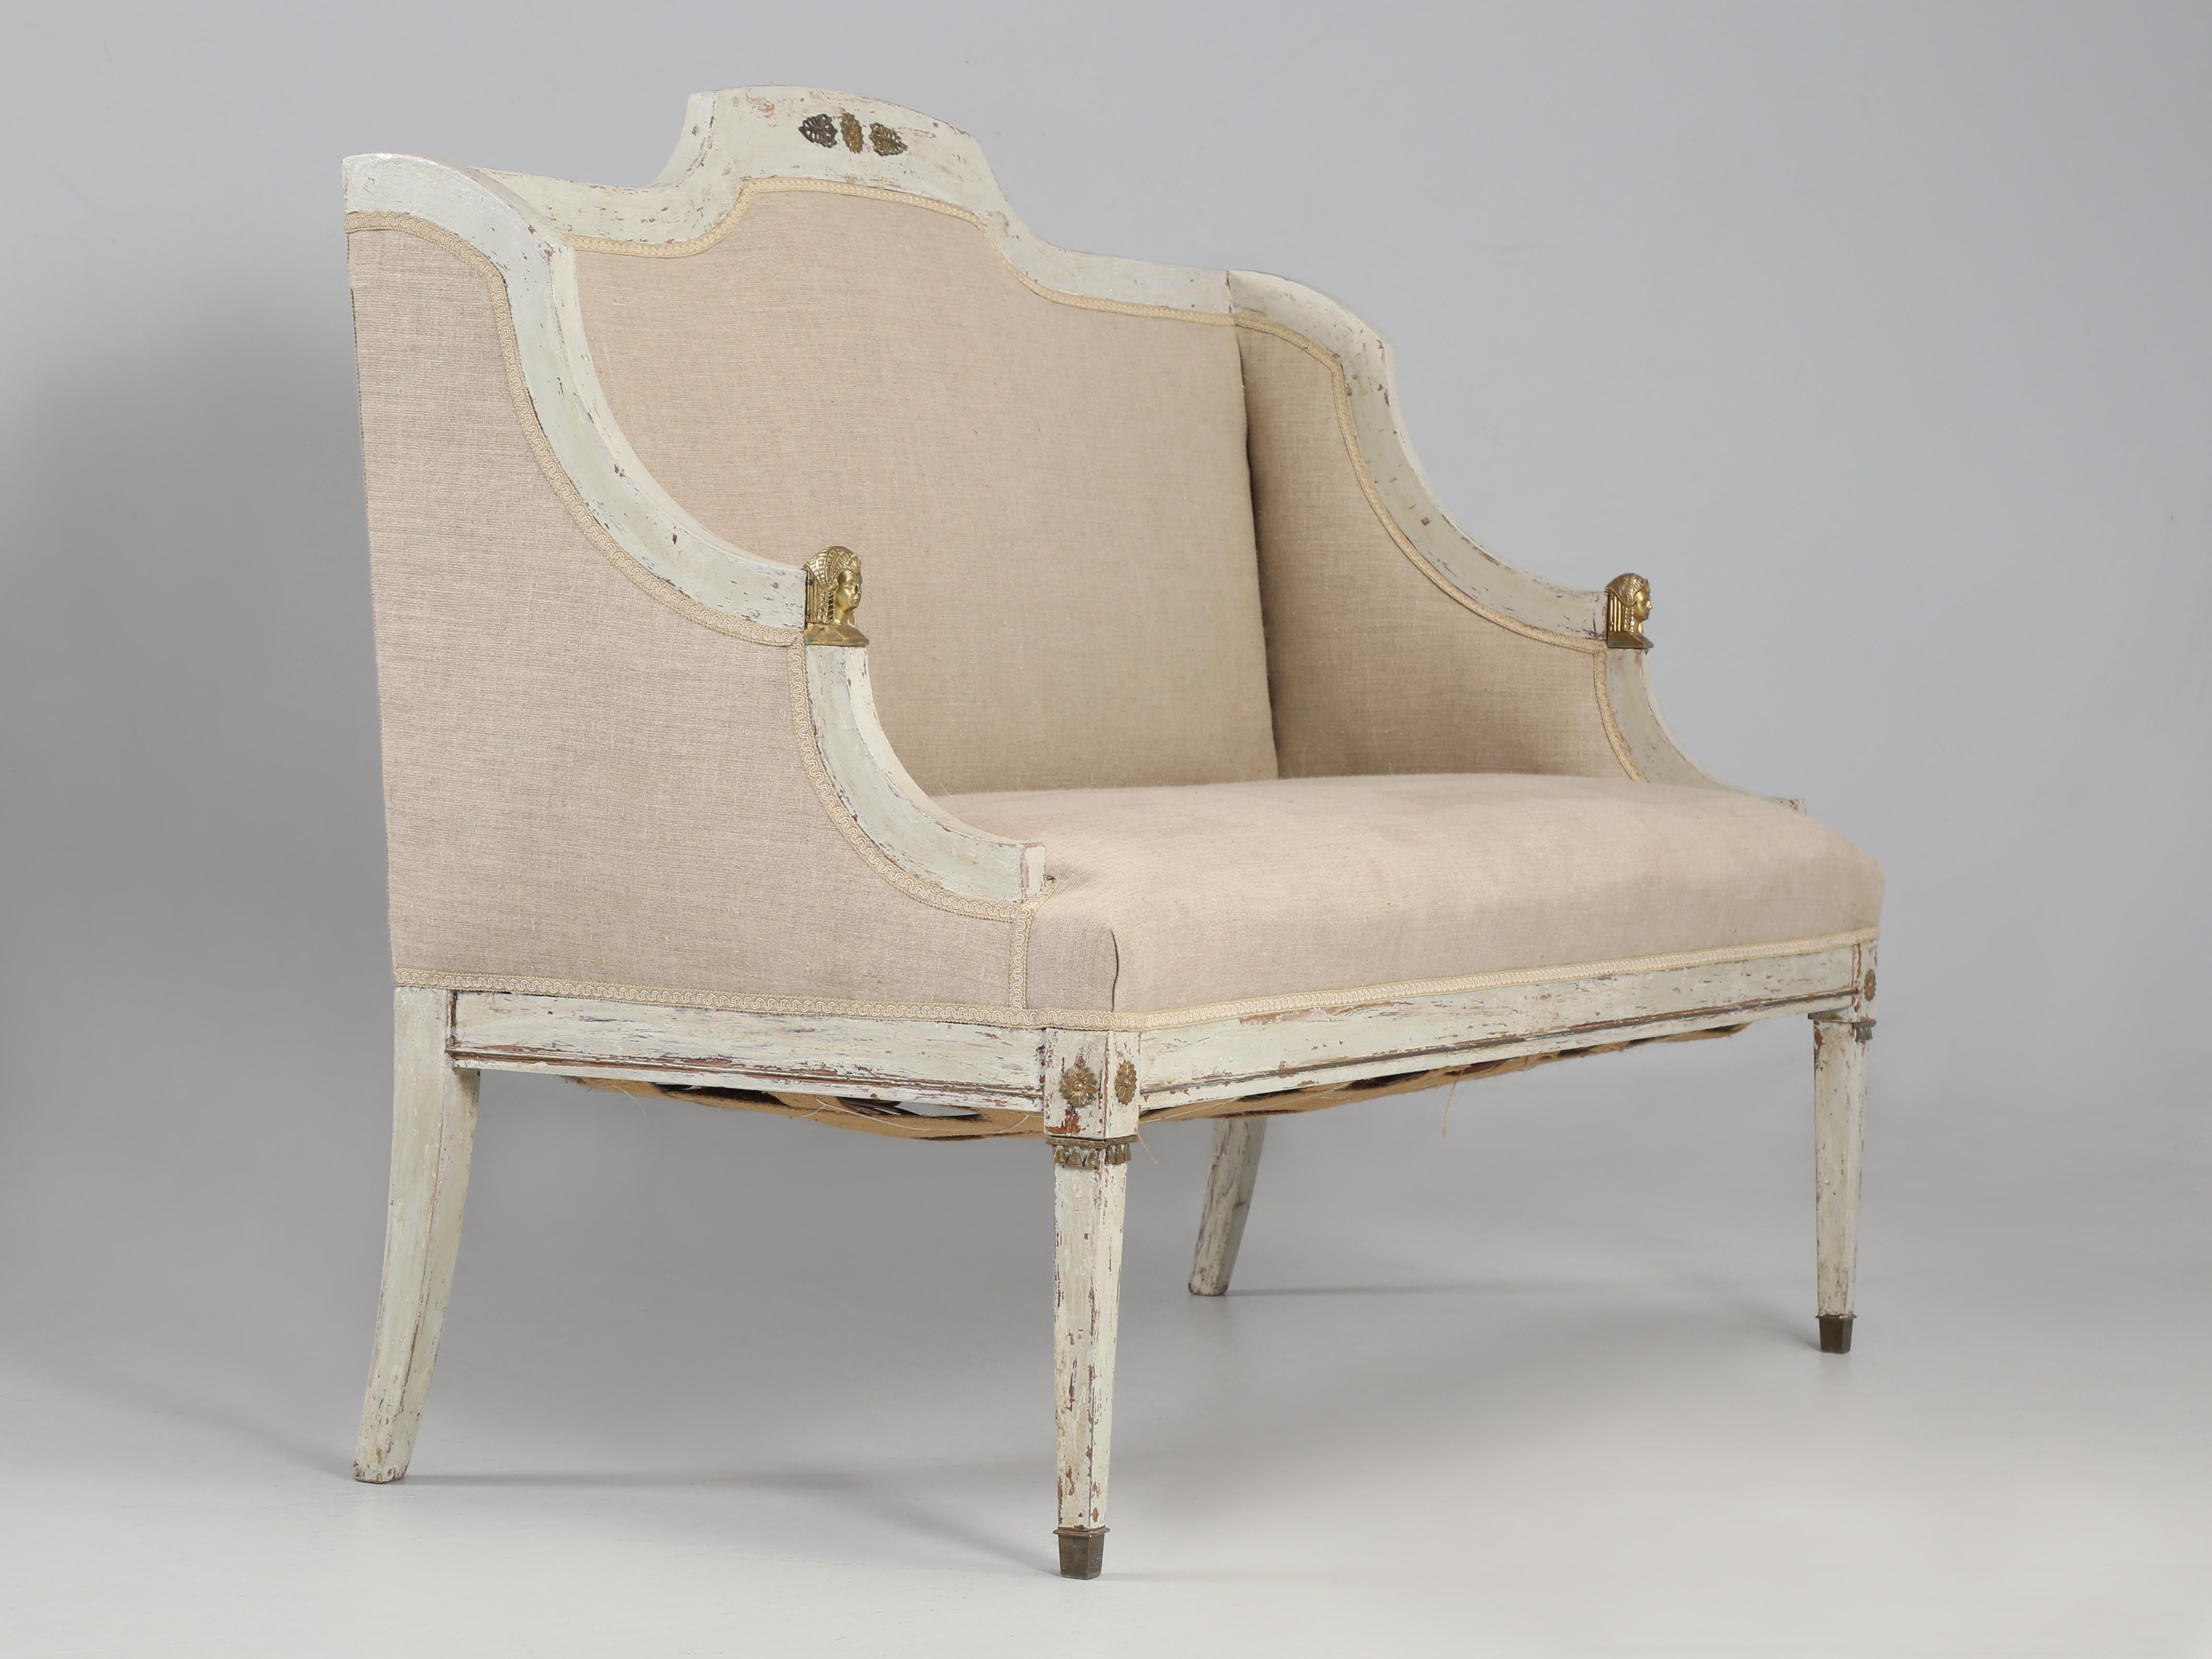 Hand-Crafted Antique Swedish Gustavian Style Settee in Putty Grey Paint with Newer Linen